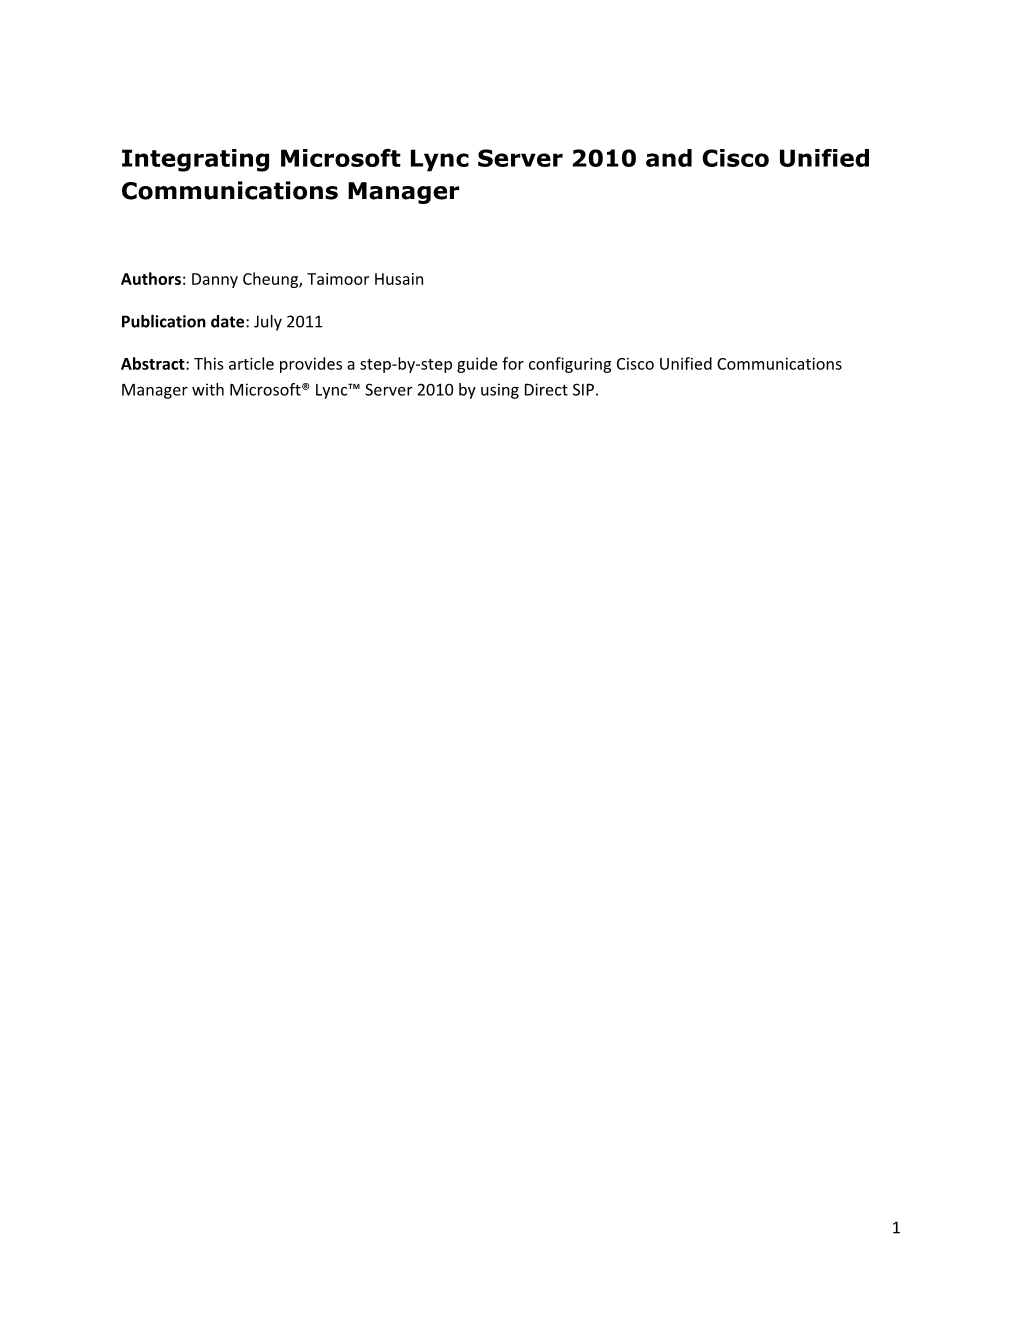 Integrating Microsoft Lync Server 2010 and Cisco Unified Communications Manager